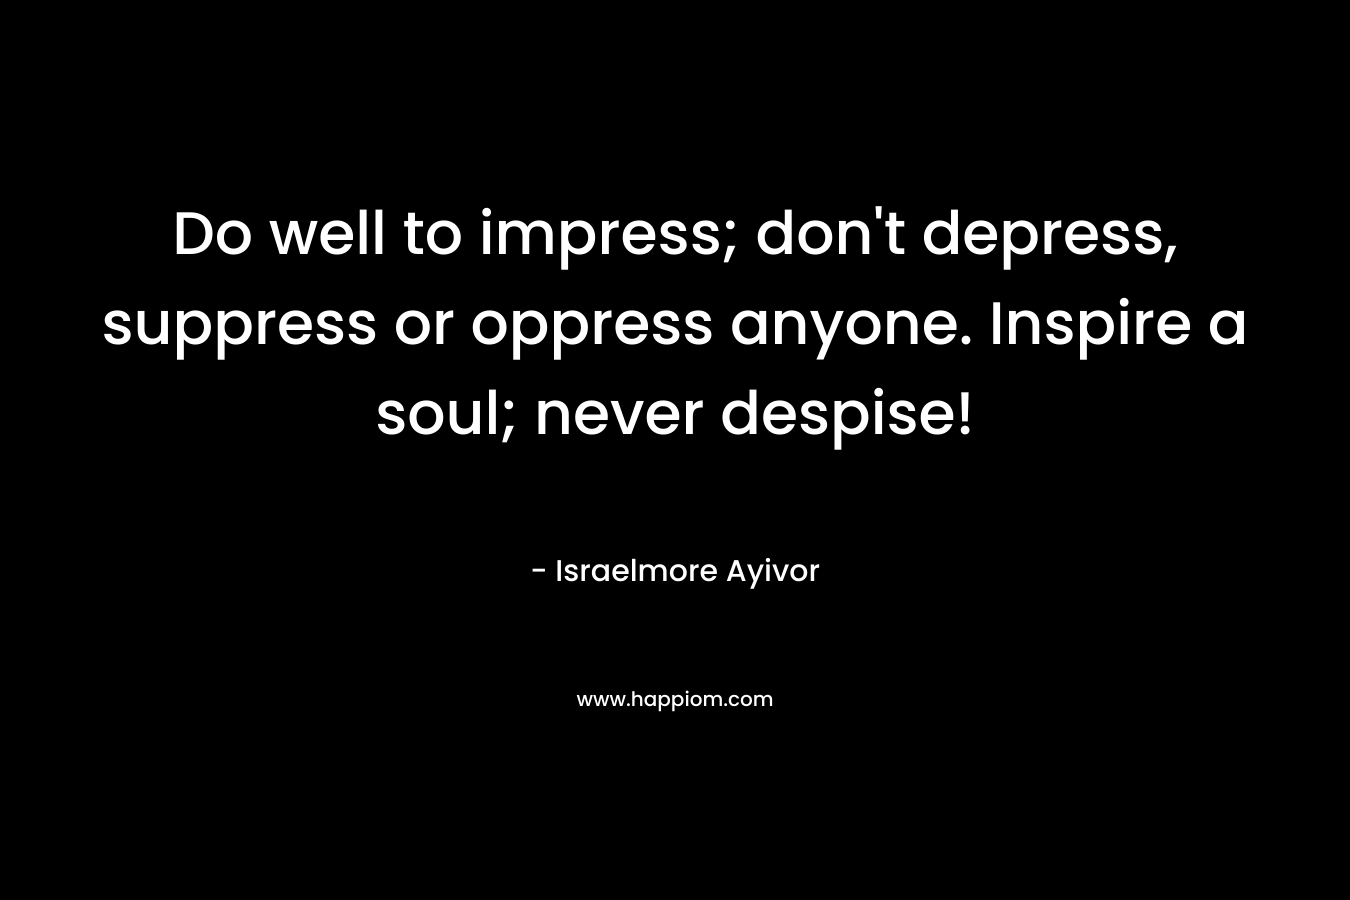 Do well to impress; don’t depress, suppress or oppress anyone. Inspire a soul; never despise! – Israelmore Ayivor